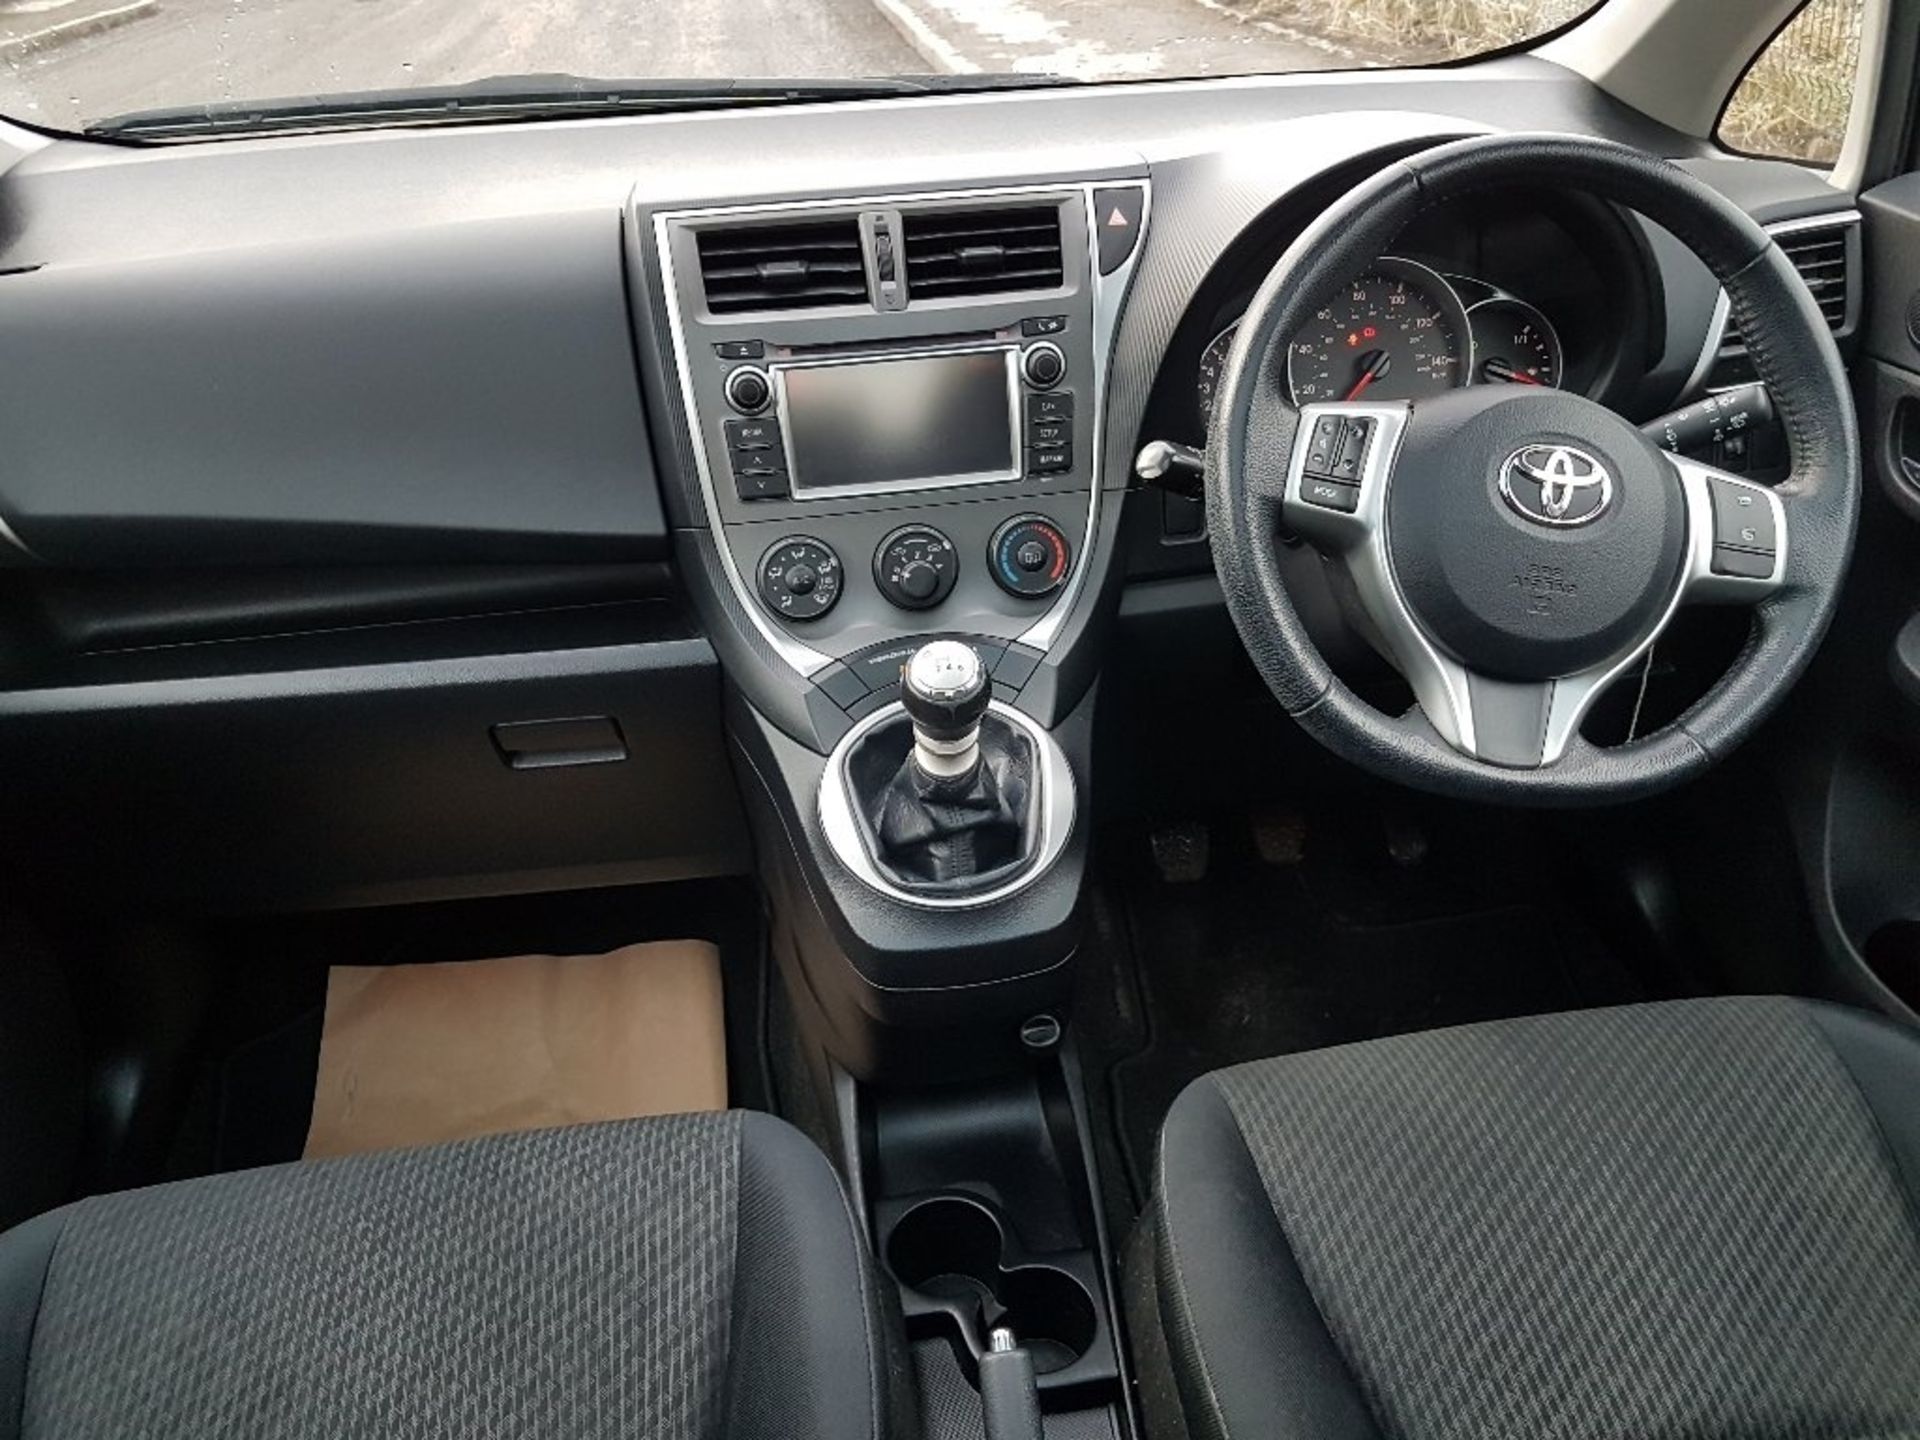 TOYOTA, VERSO S 1.33 T SPIRIT VVT-1, YT11 MUP, FIRST DATE OF REGISTRATION 30/03/18, 1.3 LITRE, - Image 14 of 20